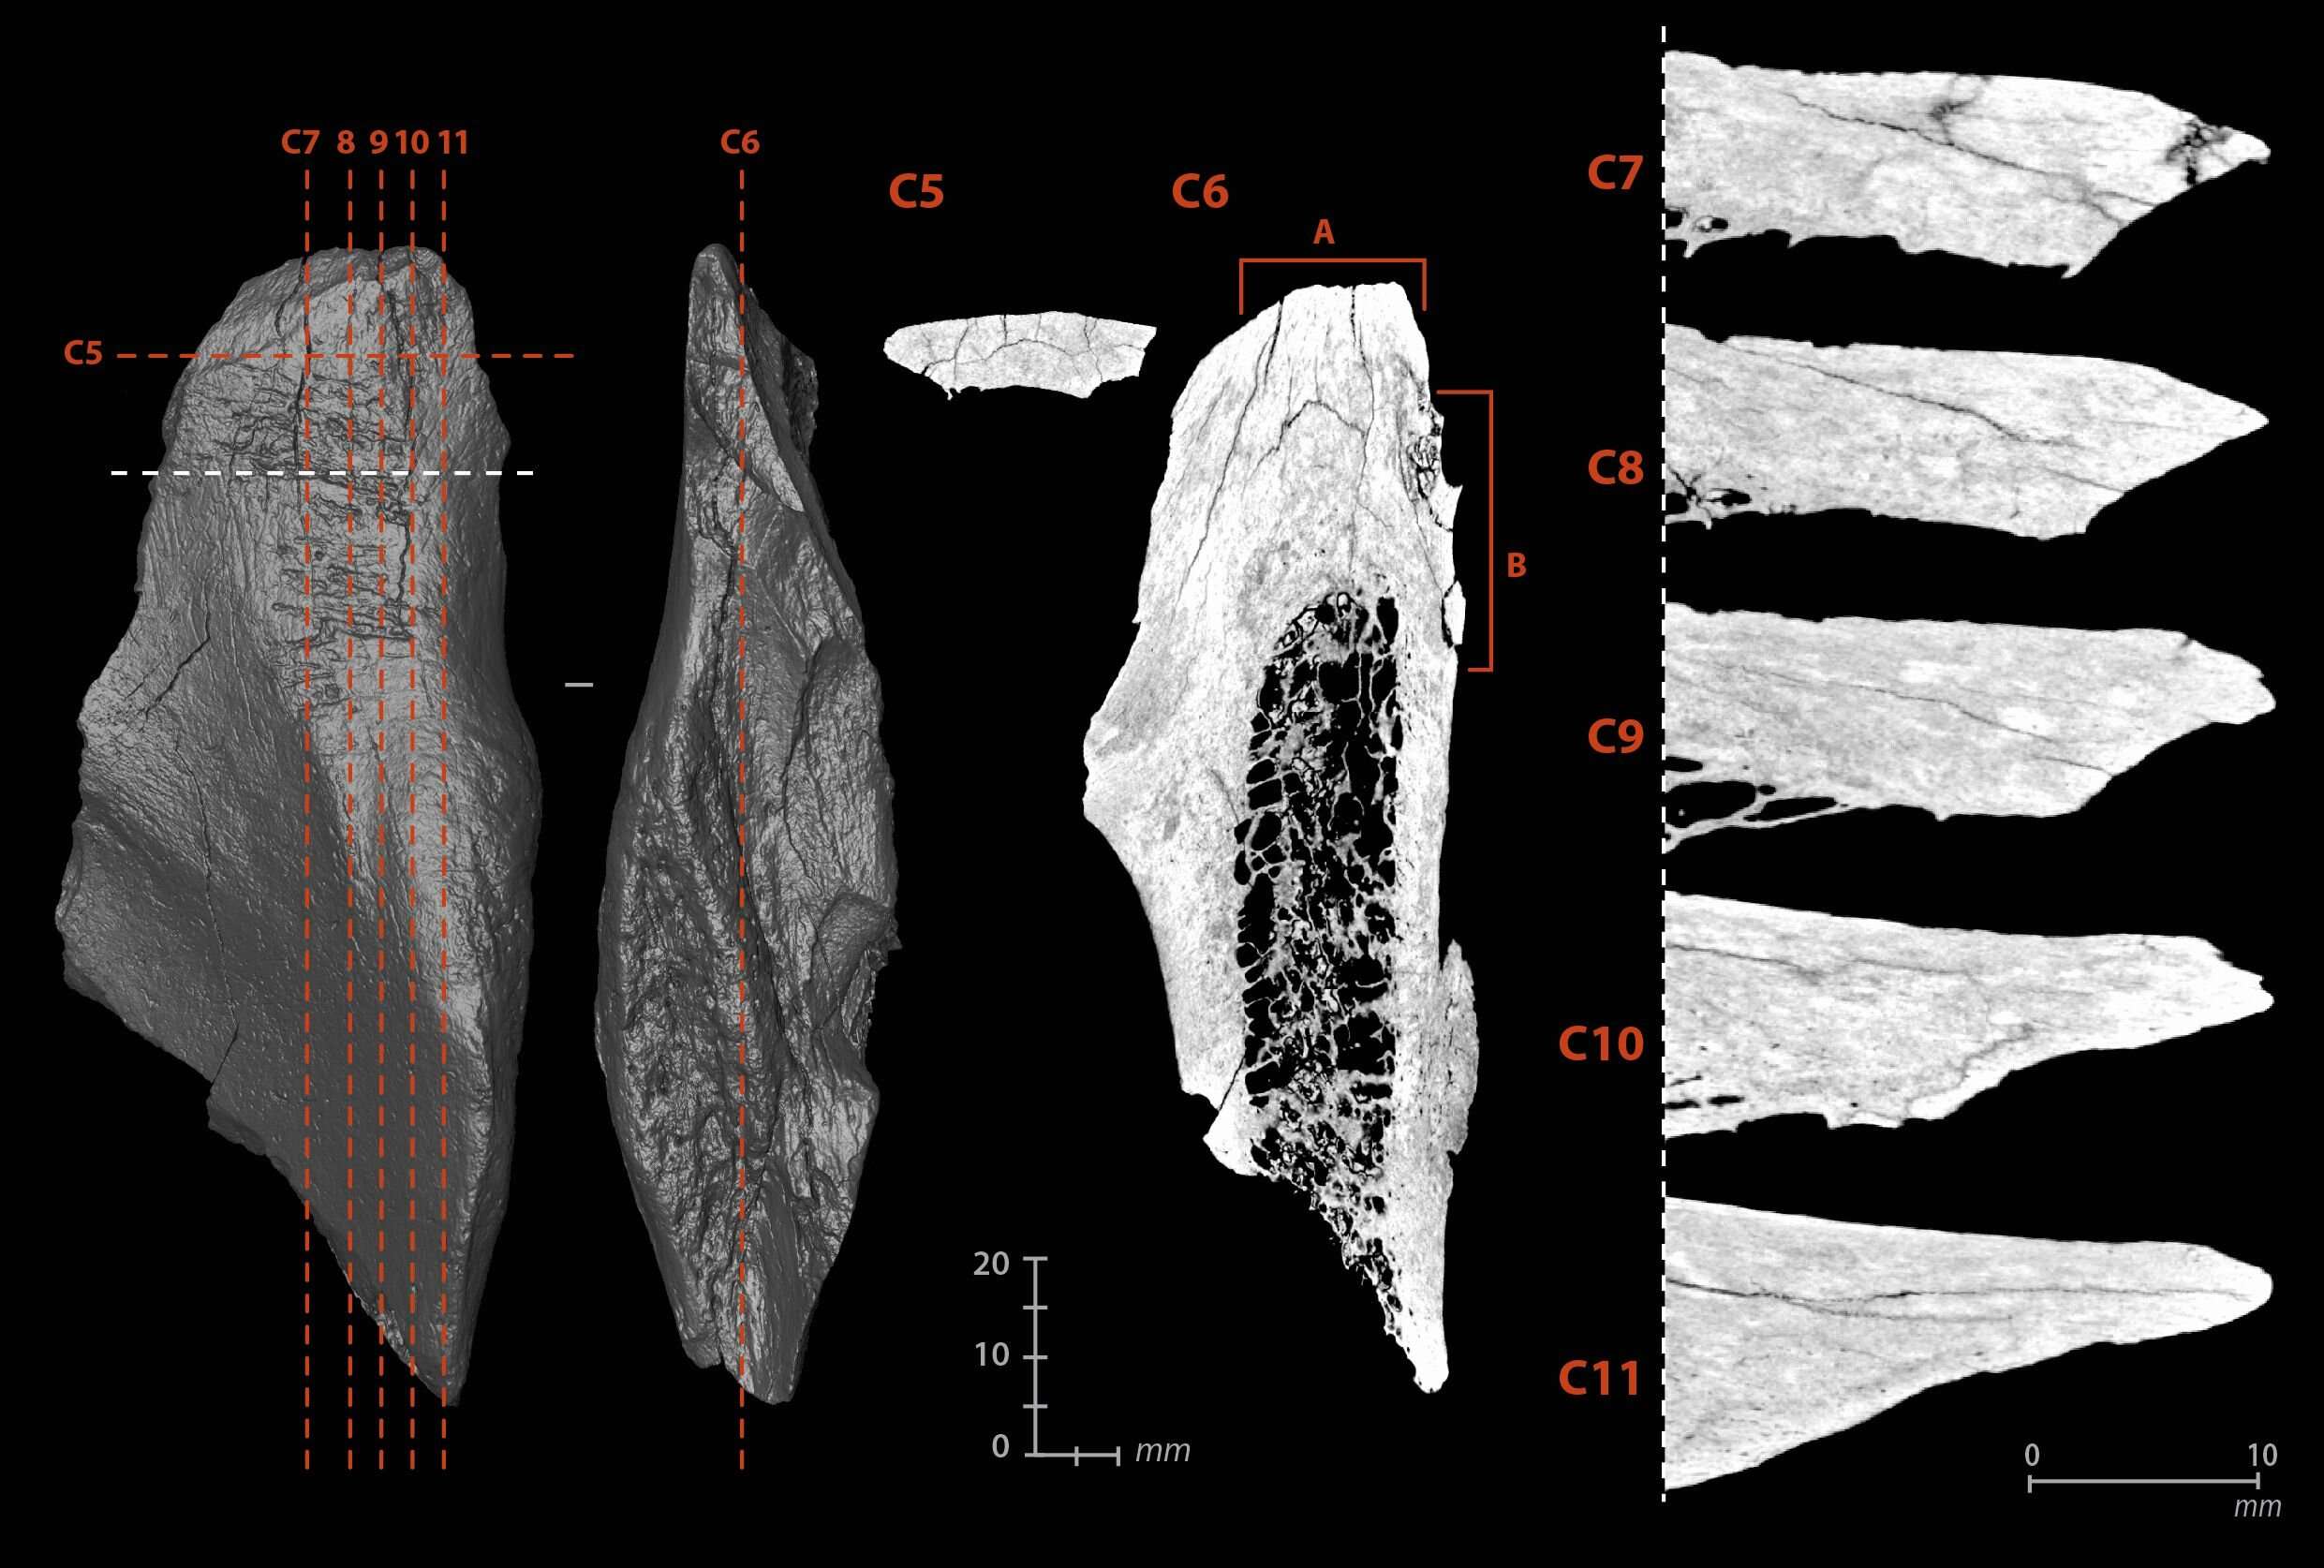 Micro-tomographic views of the internal damage of the multi-functional tool.